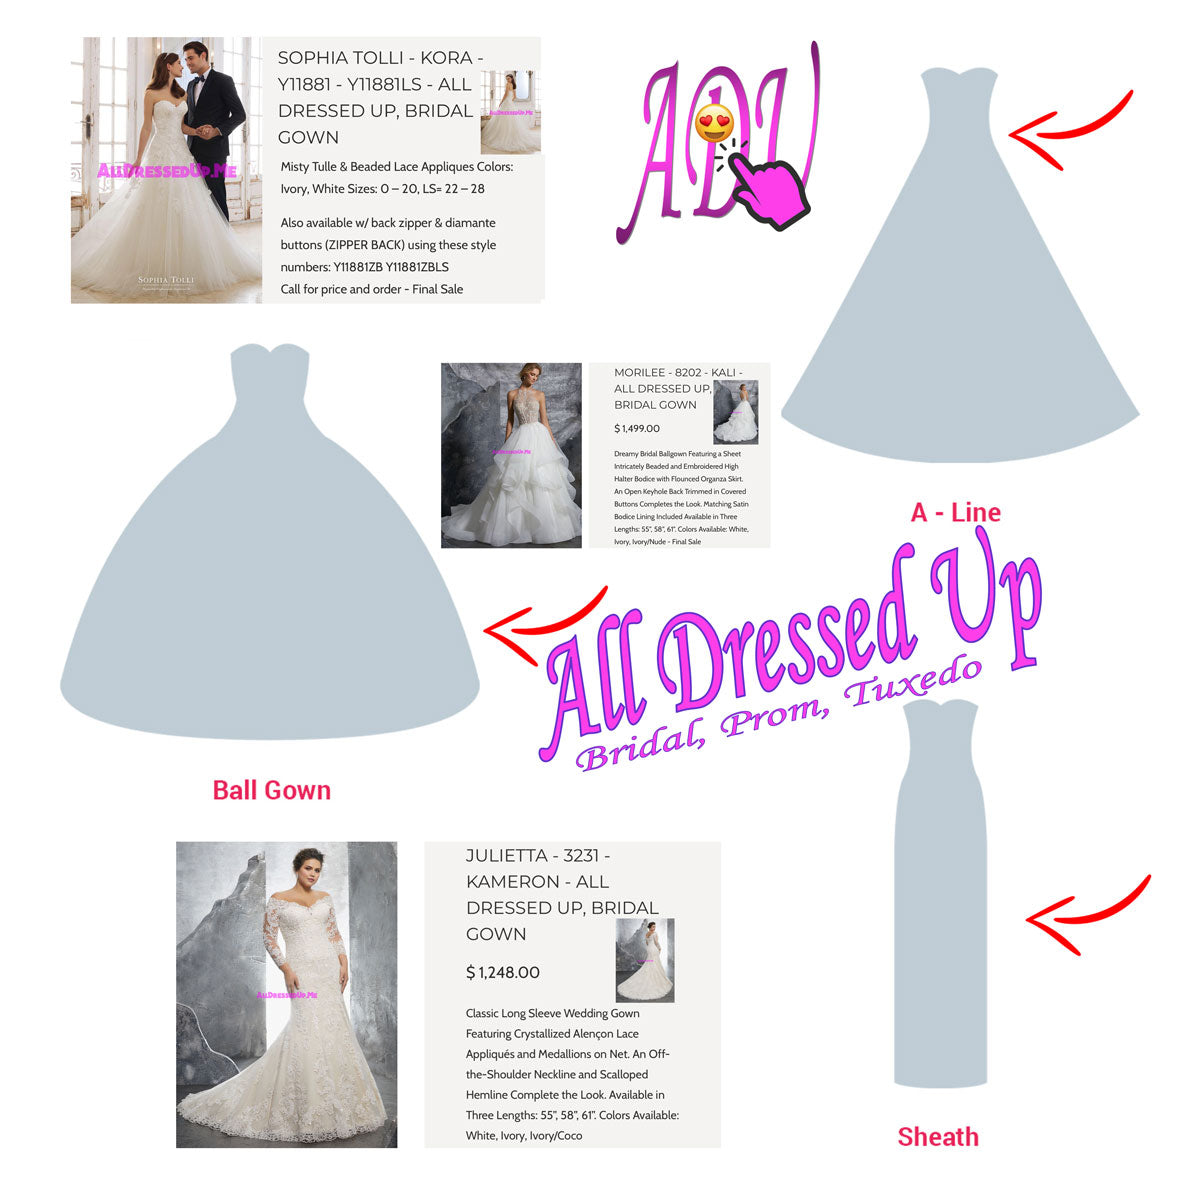 A Guide to Popular Wedding Gown Silhouettes | Part 1 of 2 - A-Line, Ball Gown & Sheath | Chattanooga, TN